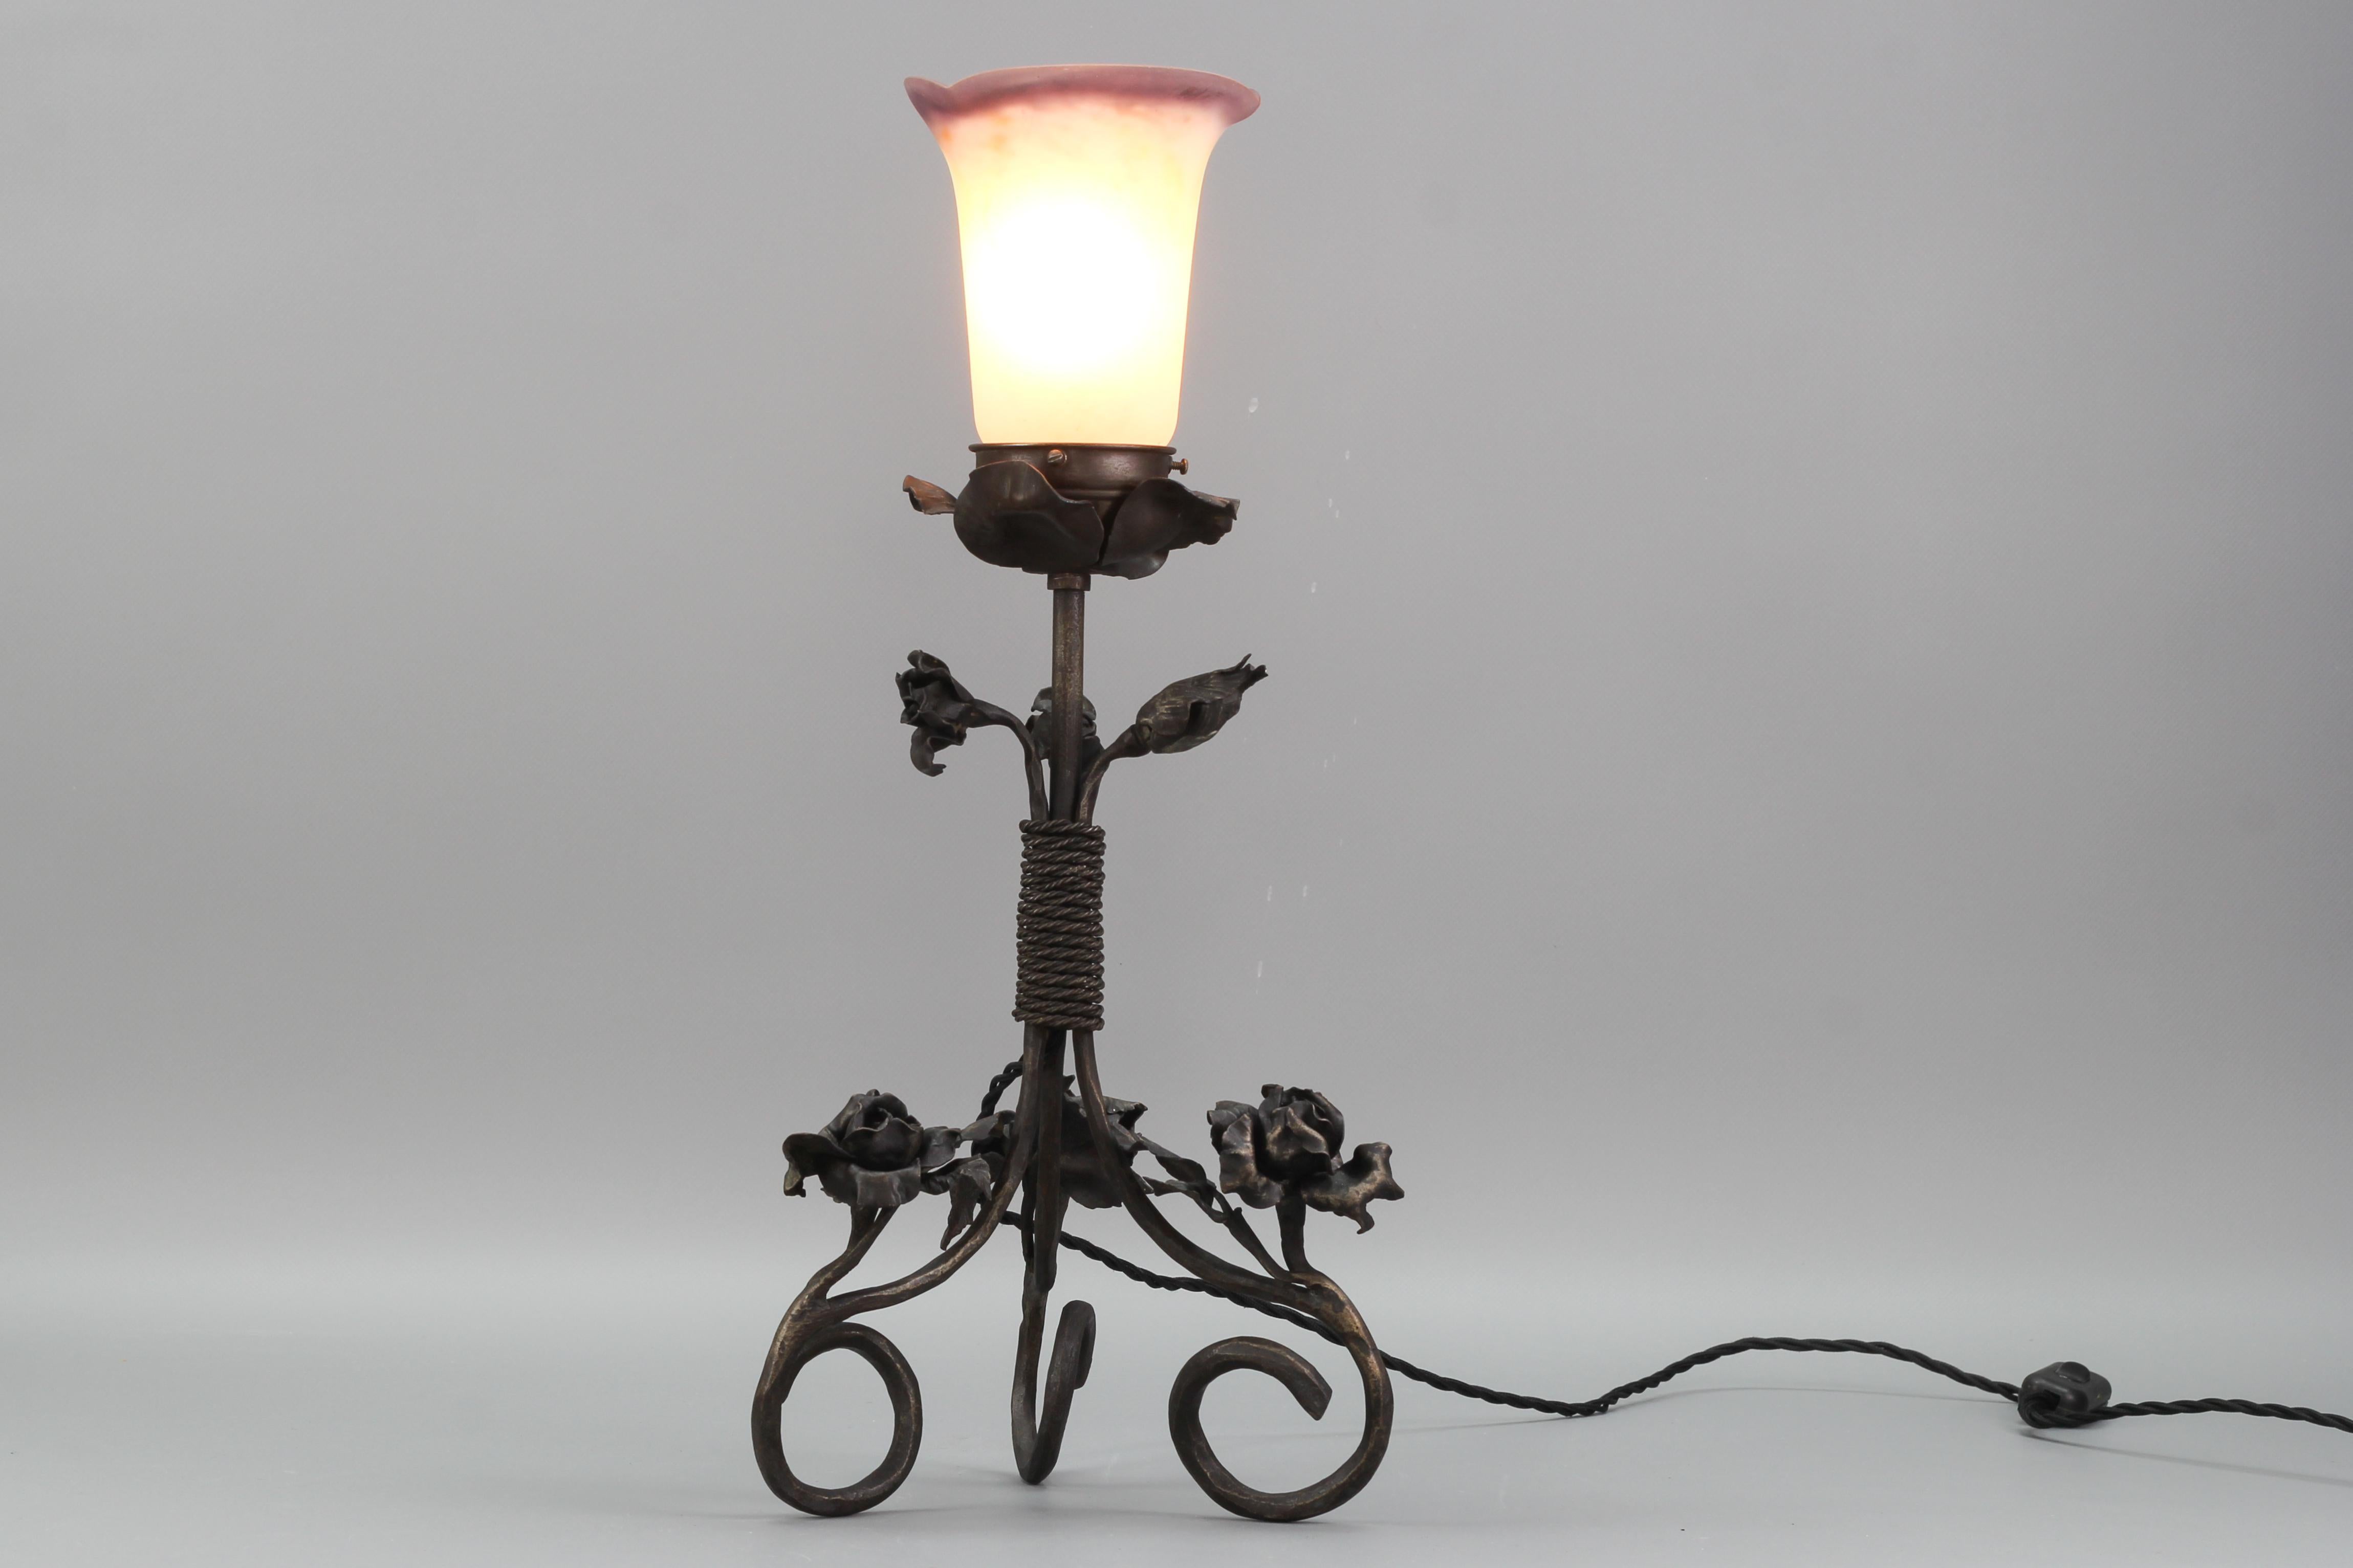 French Art Nouveau Wrought Iron and Pâte de Verre glass table lamp with Roses, circa the 1930s.
An adorable Art Nouveau style wrought iron table lamp with Pâte de Verre glass white and dark purple lamp shade. The wrought iron base features three